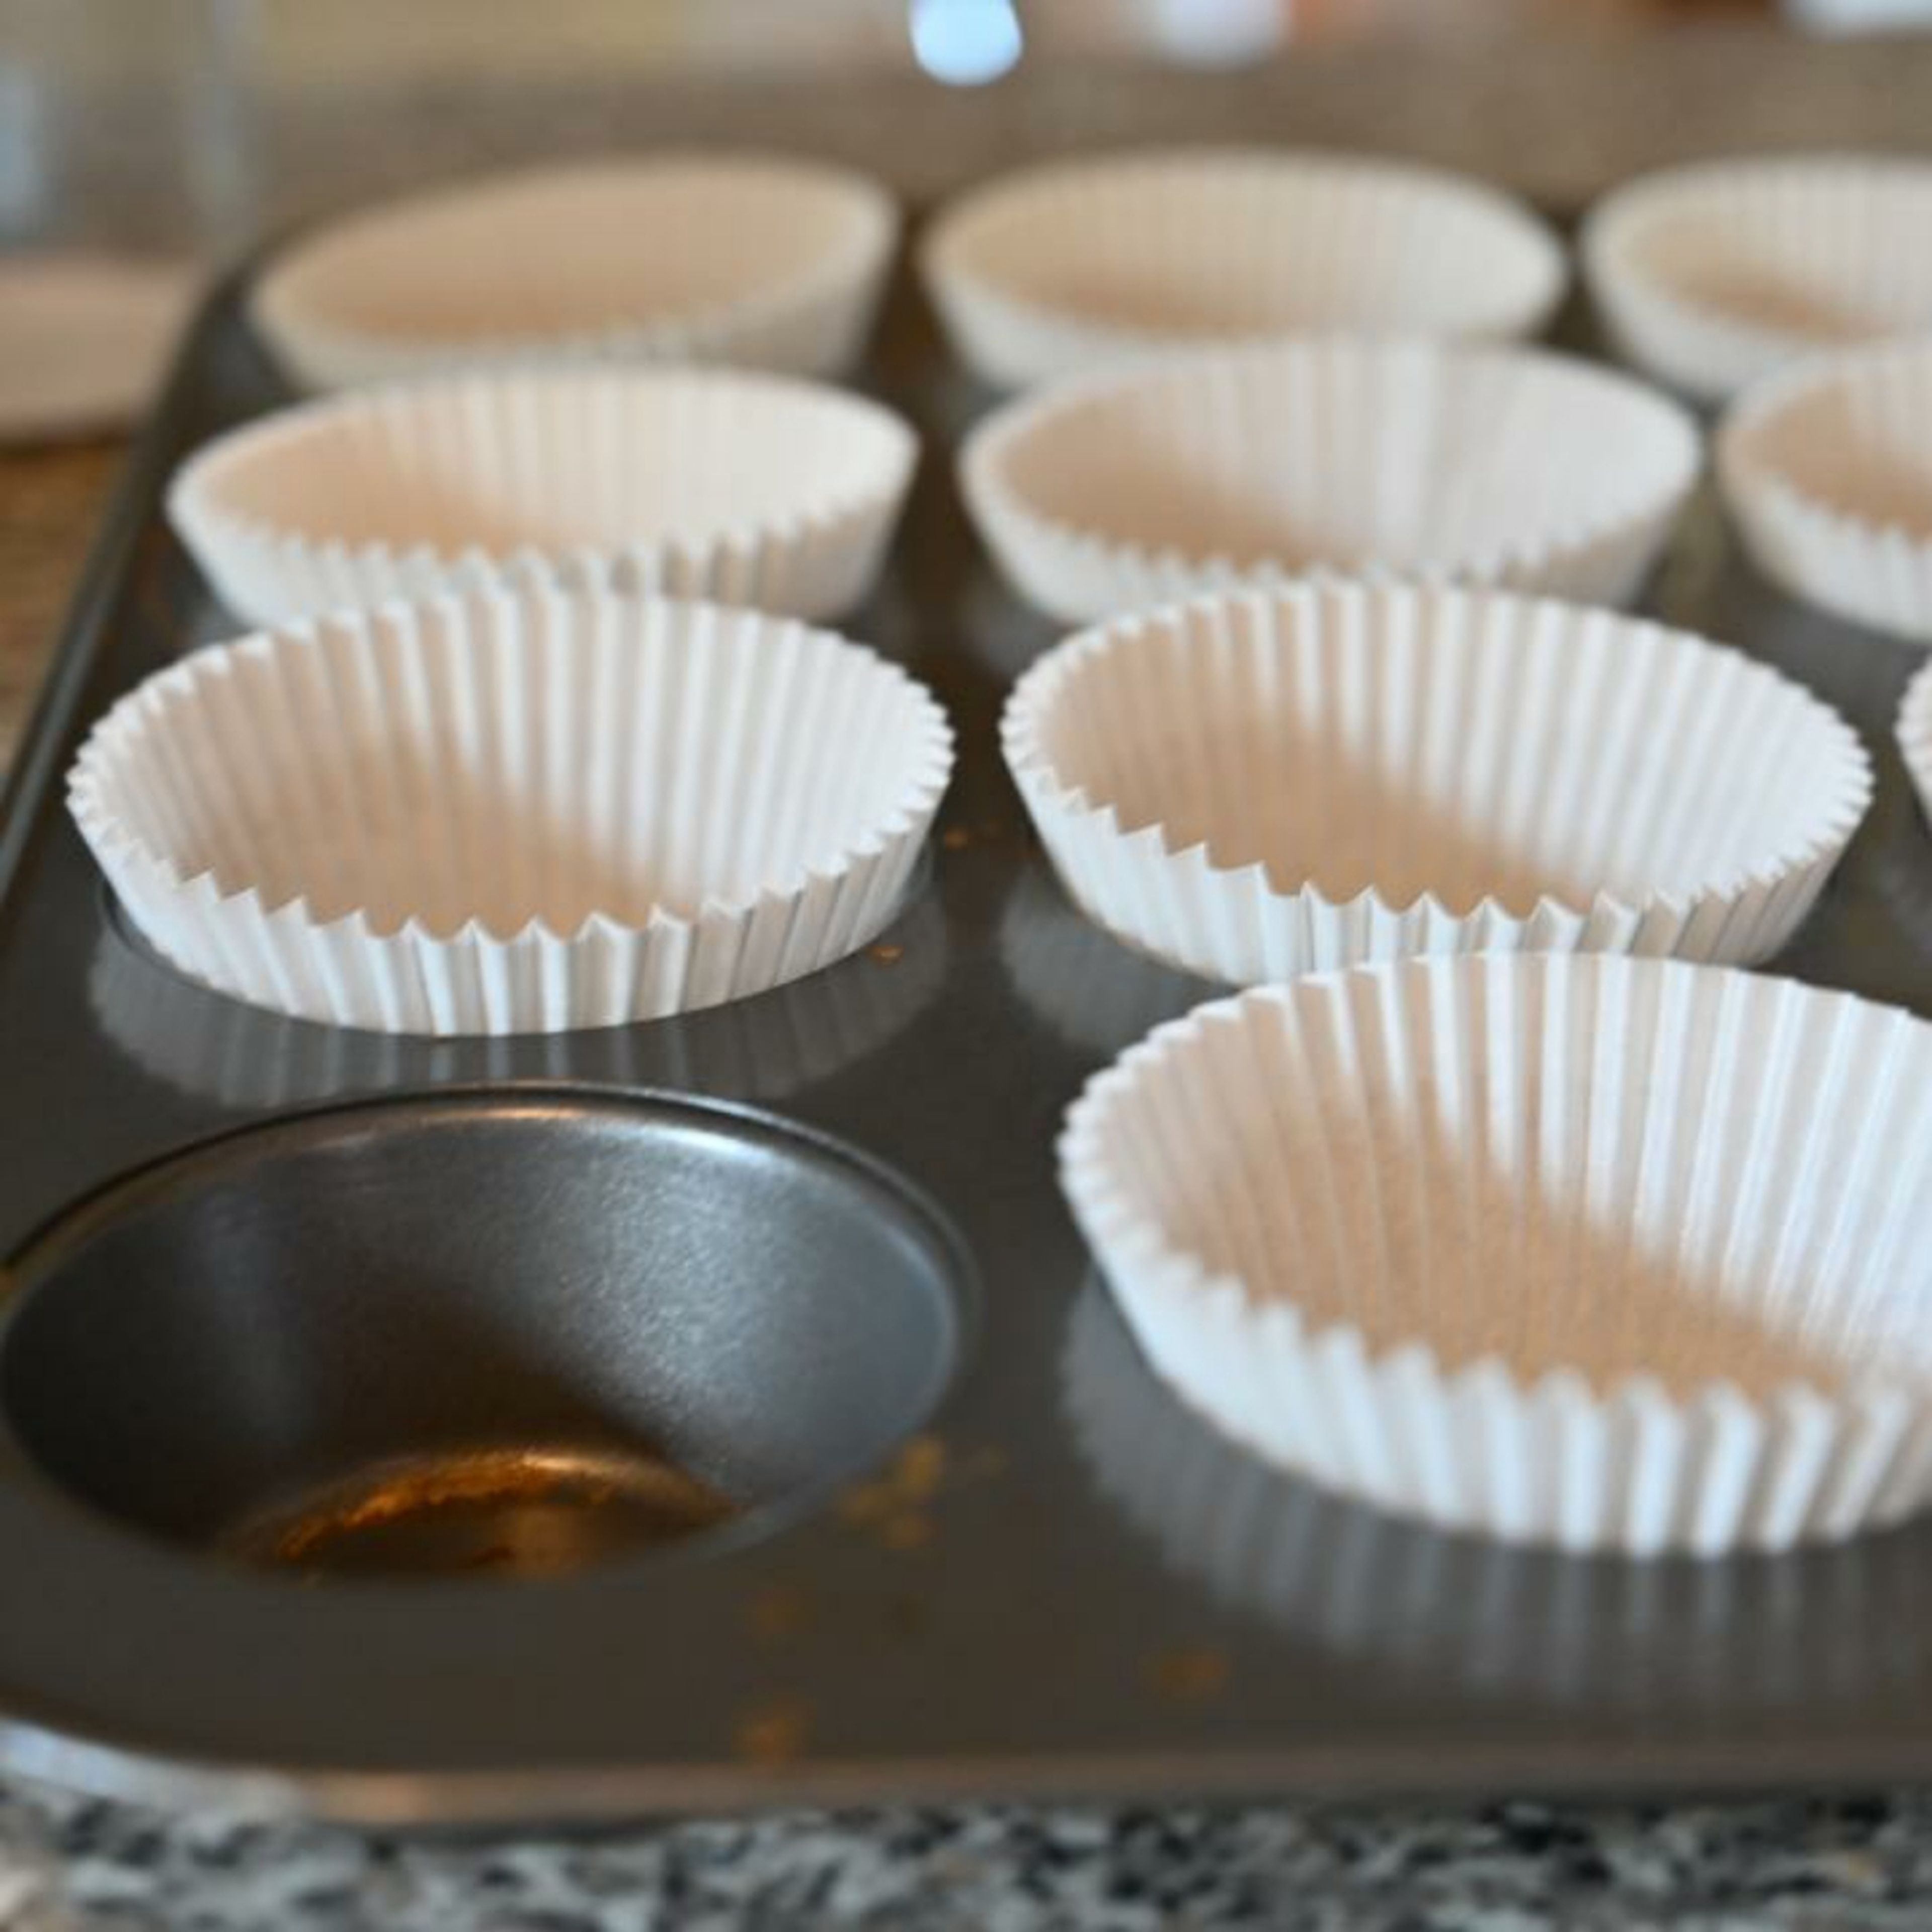 Line the cupcake tray with cupcake cases.